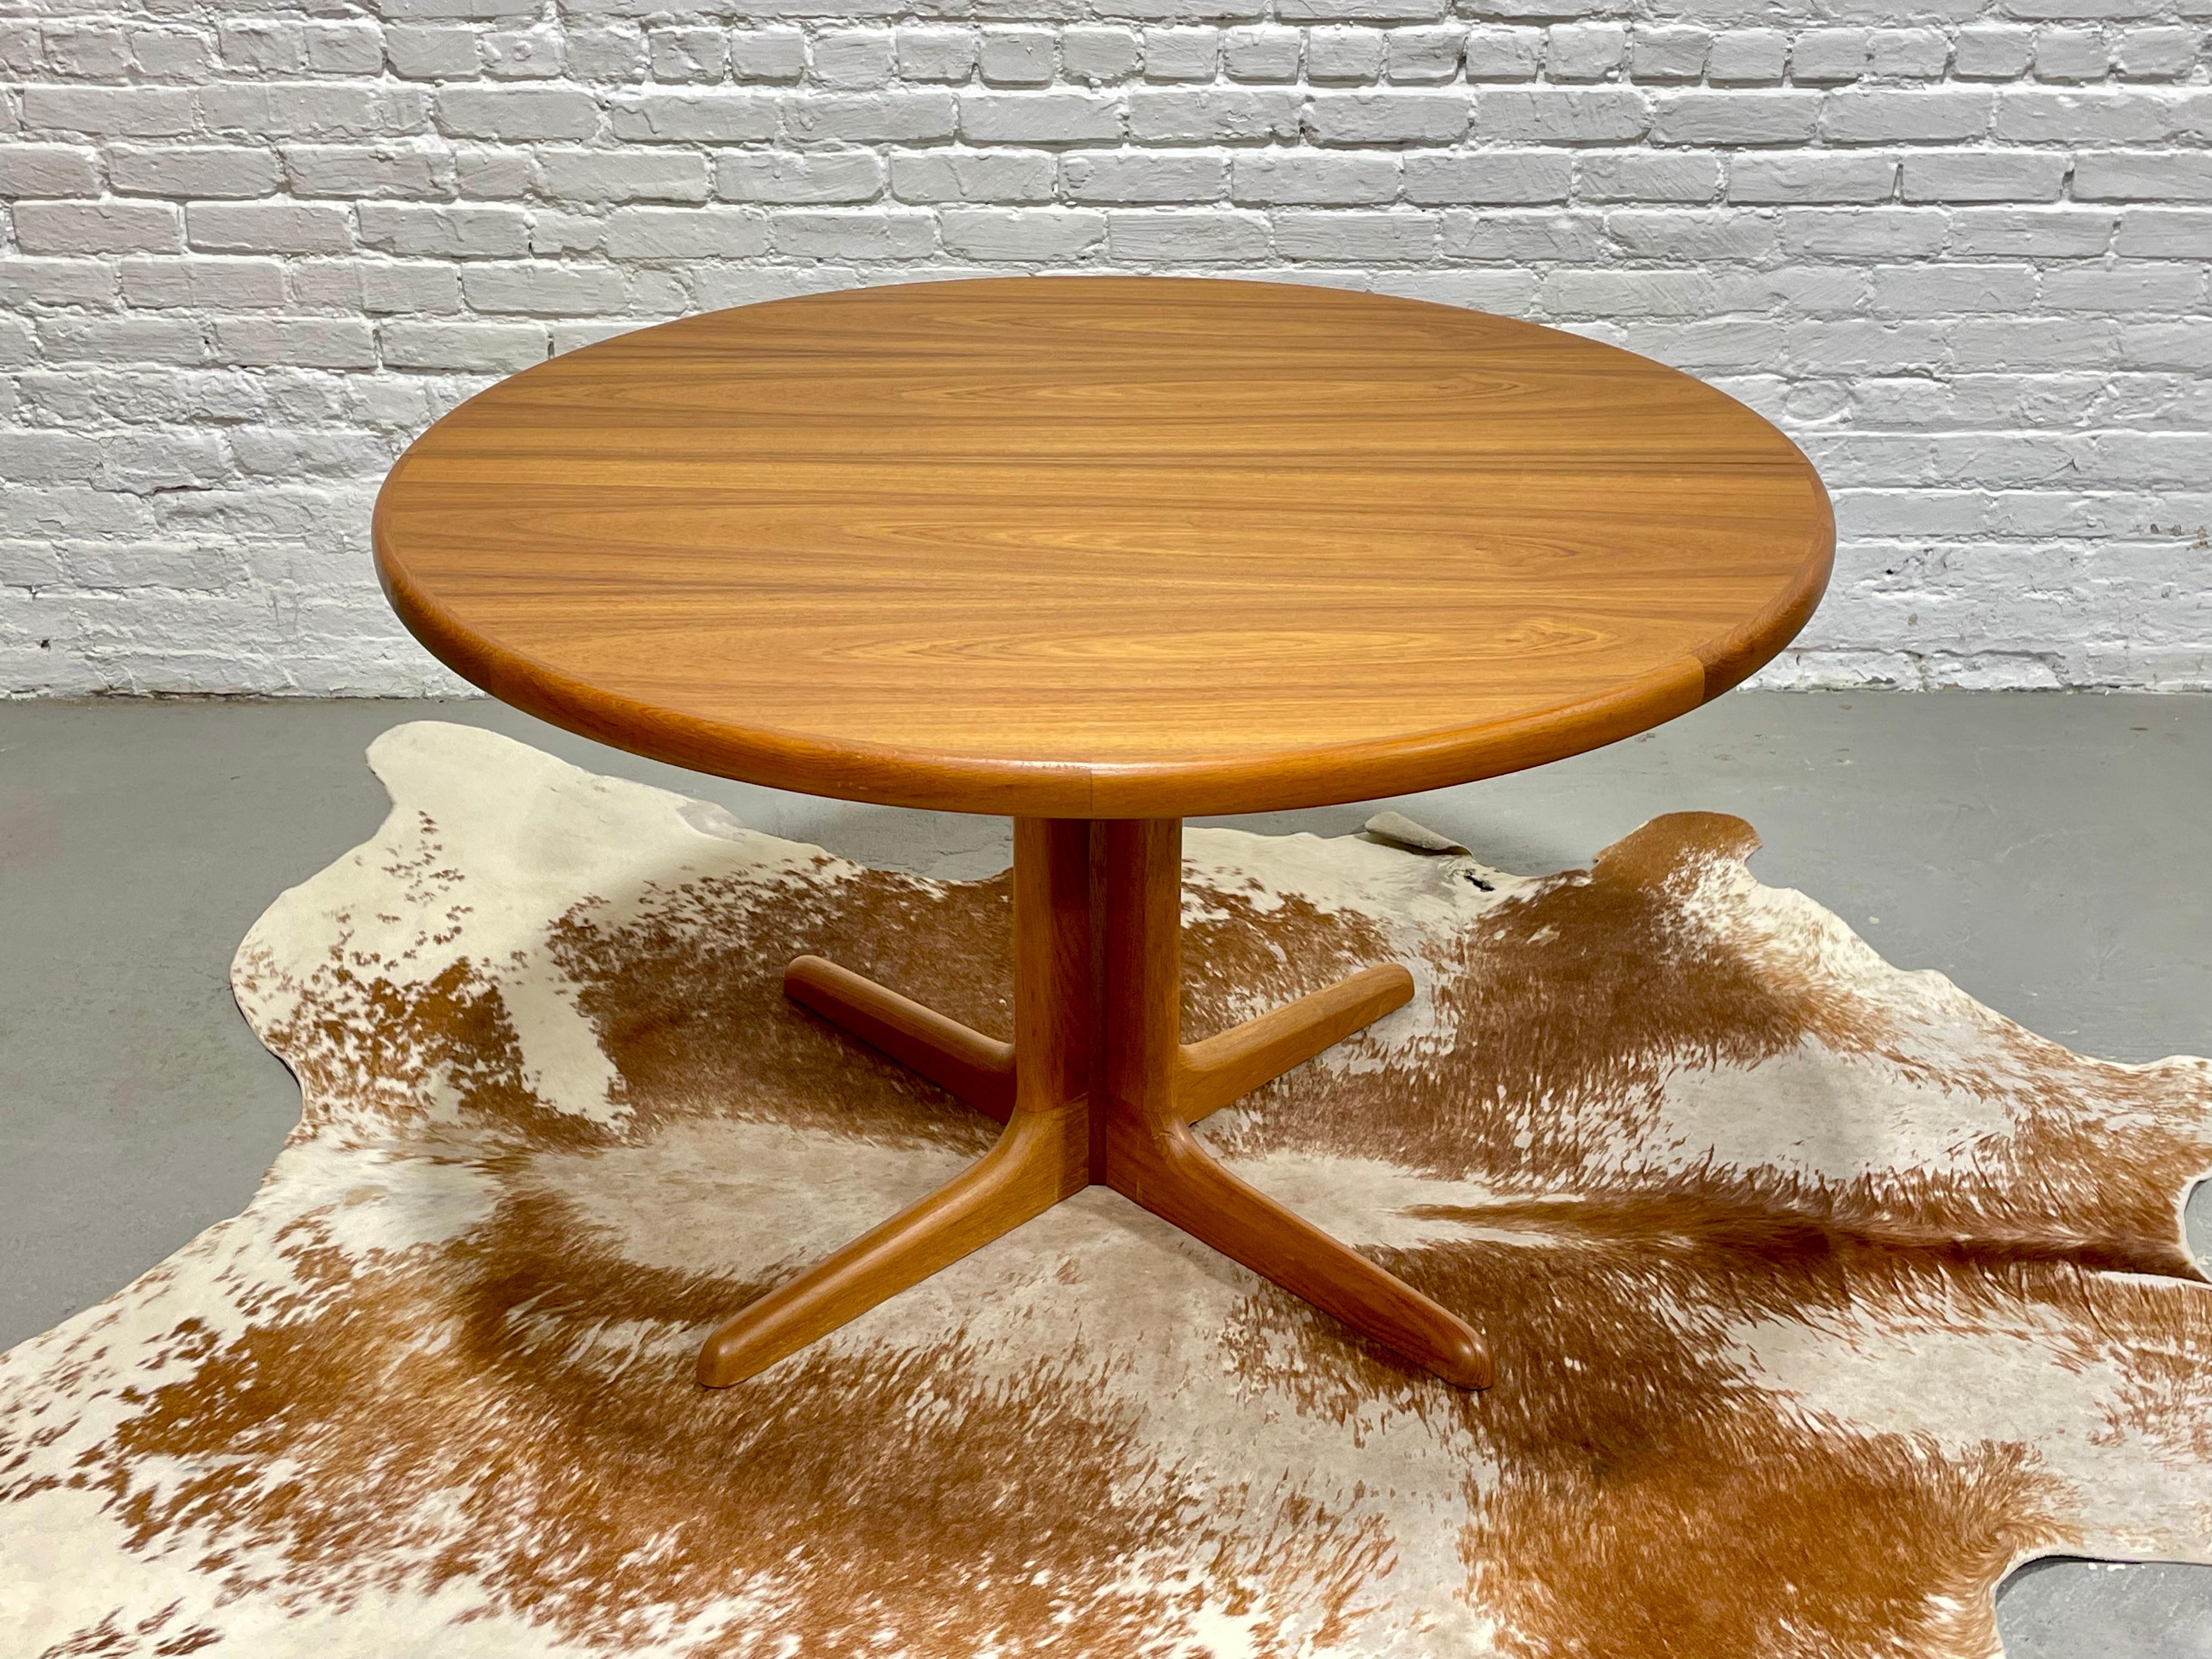 Mid Century Modern Teak Round Dining Table by Skovby, Made in Denmark. The table has stunning wood grains and is in incredible vintage condition - appears to have never been used. Easily seats 4 but given the round shape, you can squeeze in another